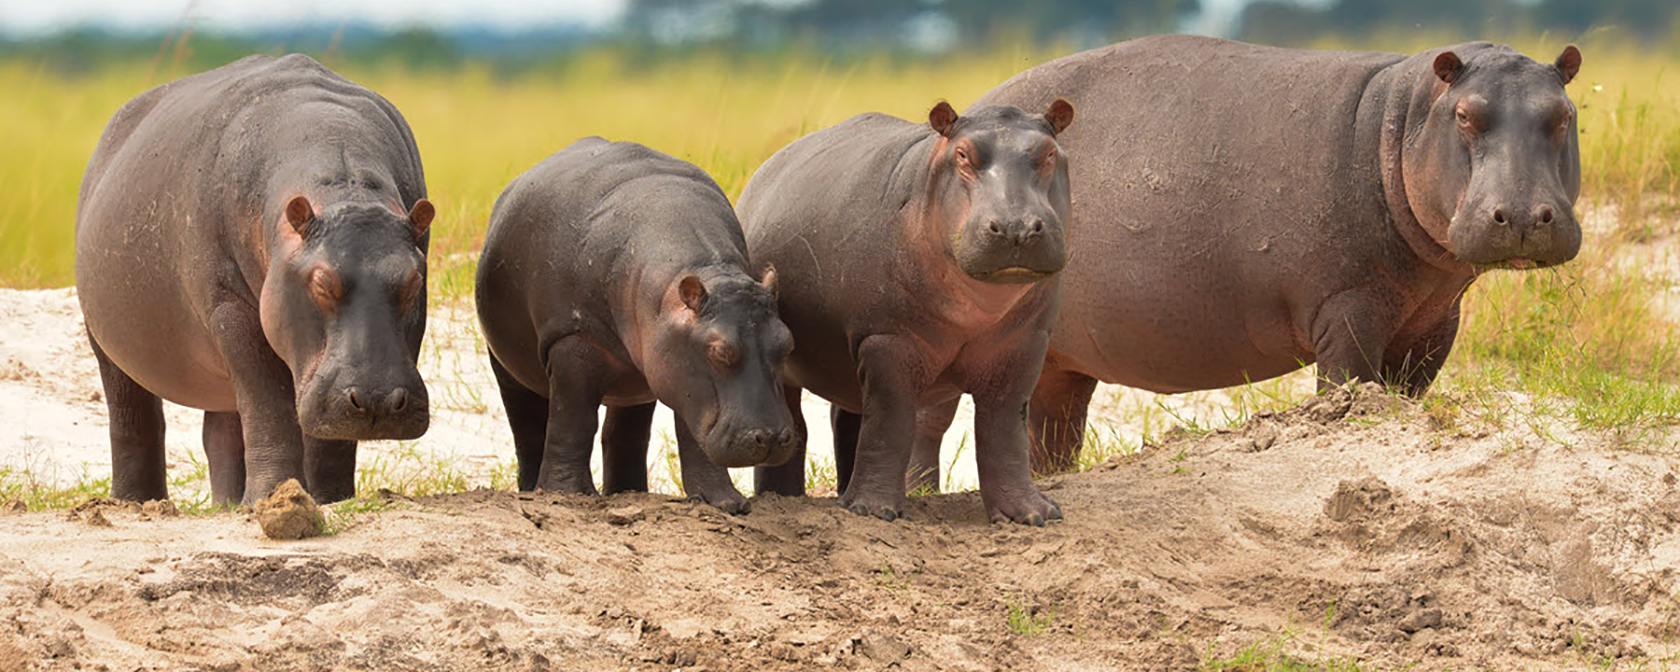 As hippos disappear, U.S. drags its feet on endangered species protections